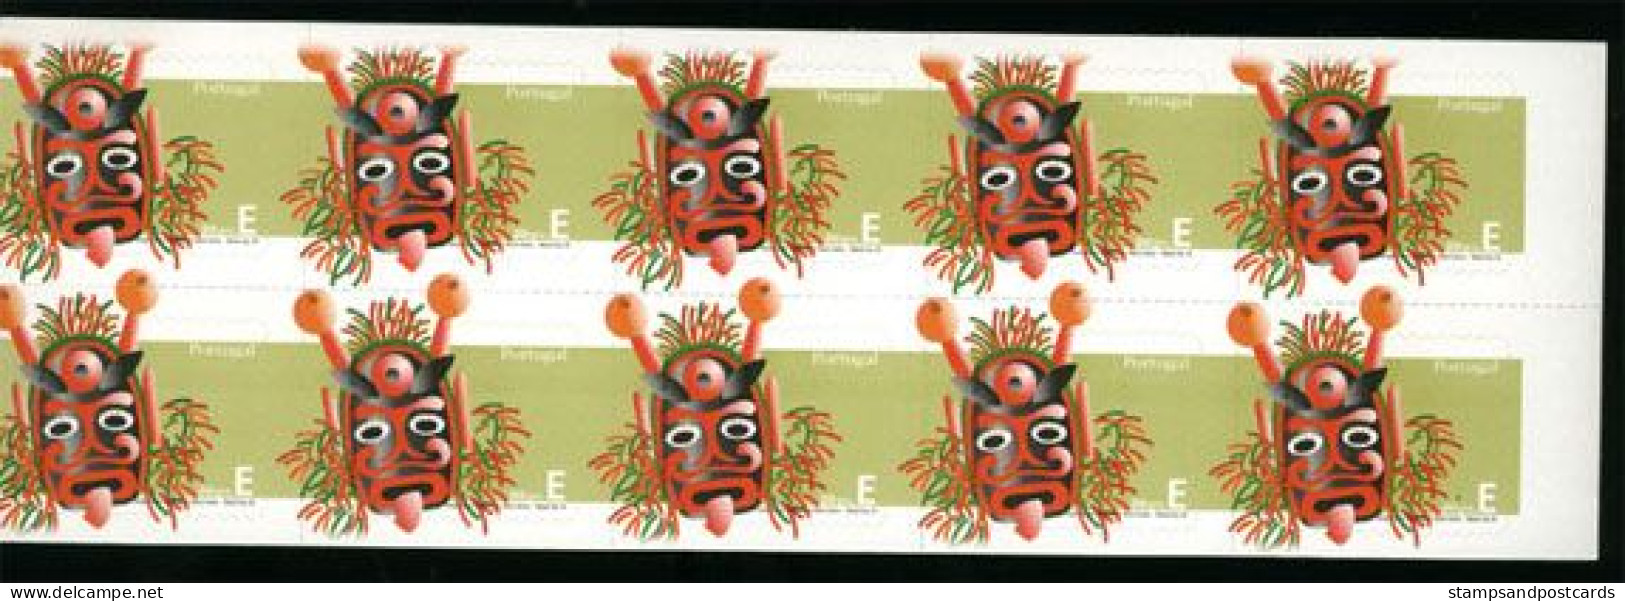 Portugal Carnet Autocollant 2006 Masque Nouvel An Bragança *** 2006 Sticker Stamp Booklet Mask New Year *** - Booklets